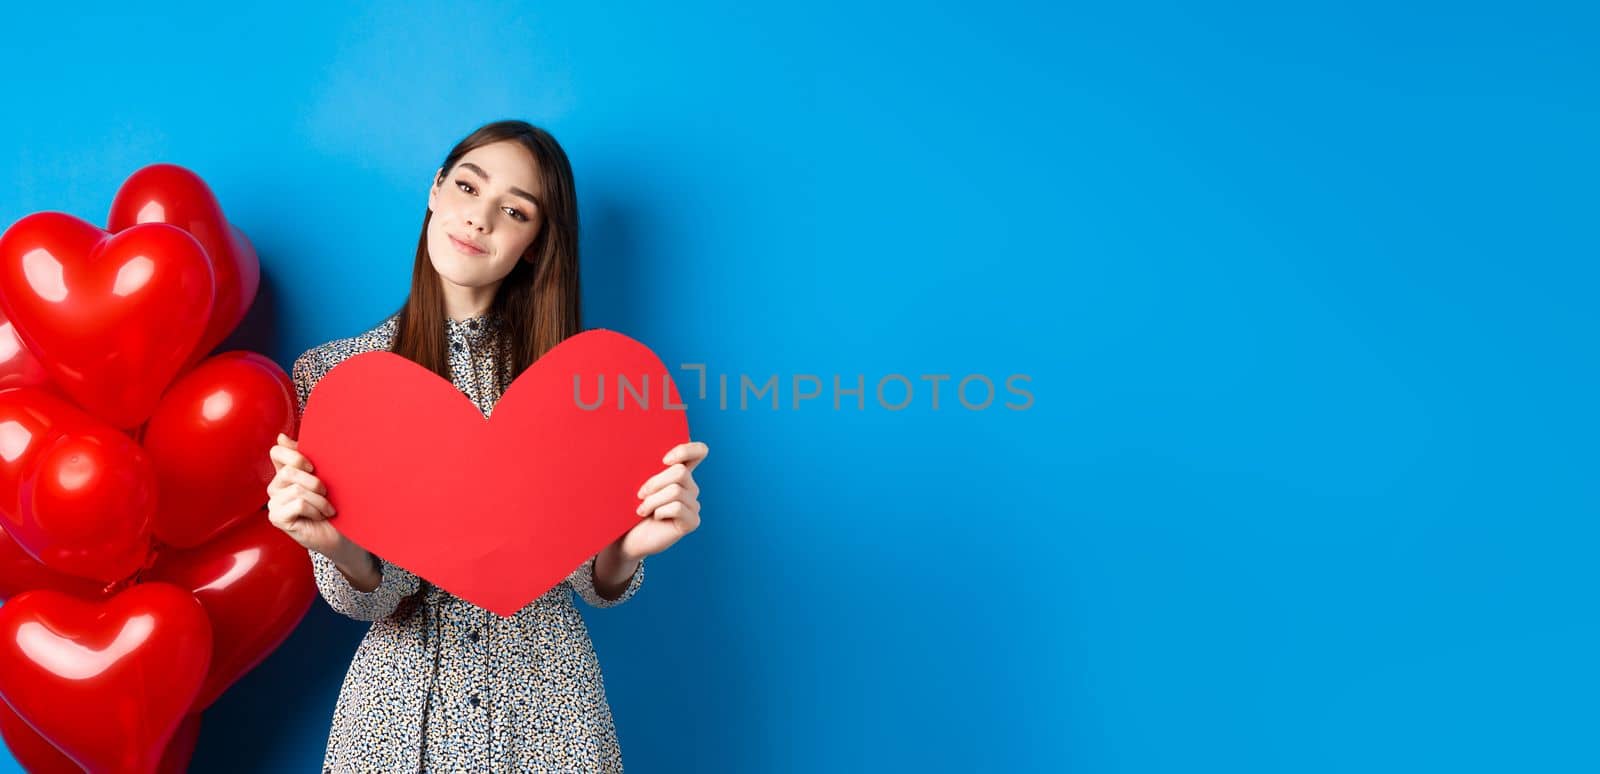 Valentines day. Romantic girl in dress showing big red heart cutout, dreaming of love, standing near holiday balloons on blue background.